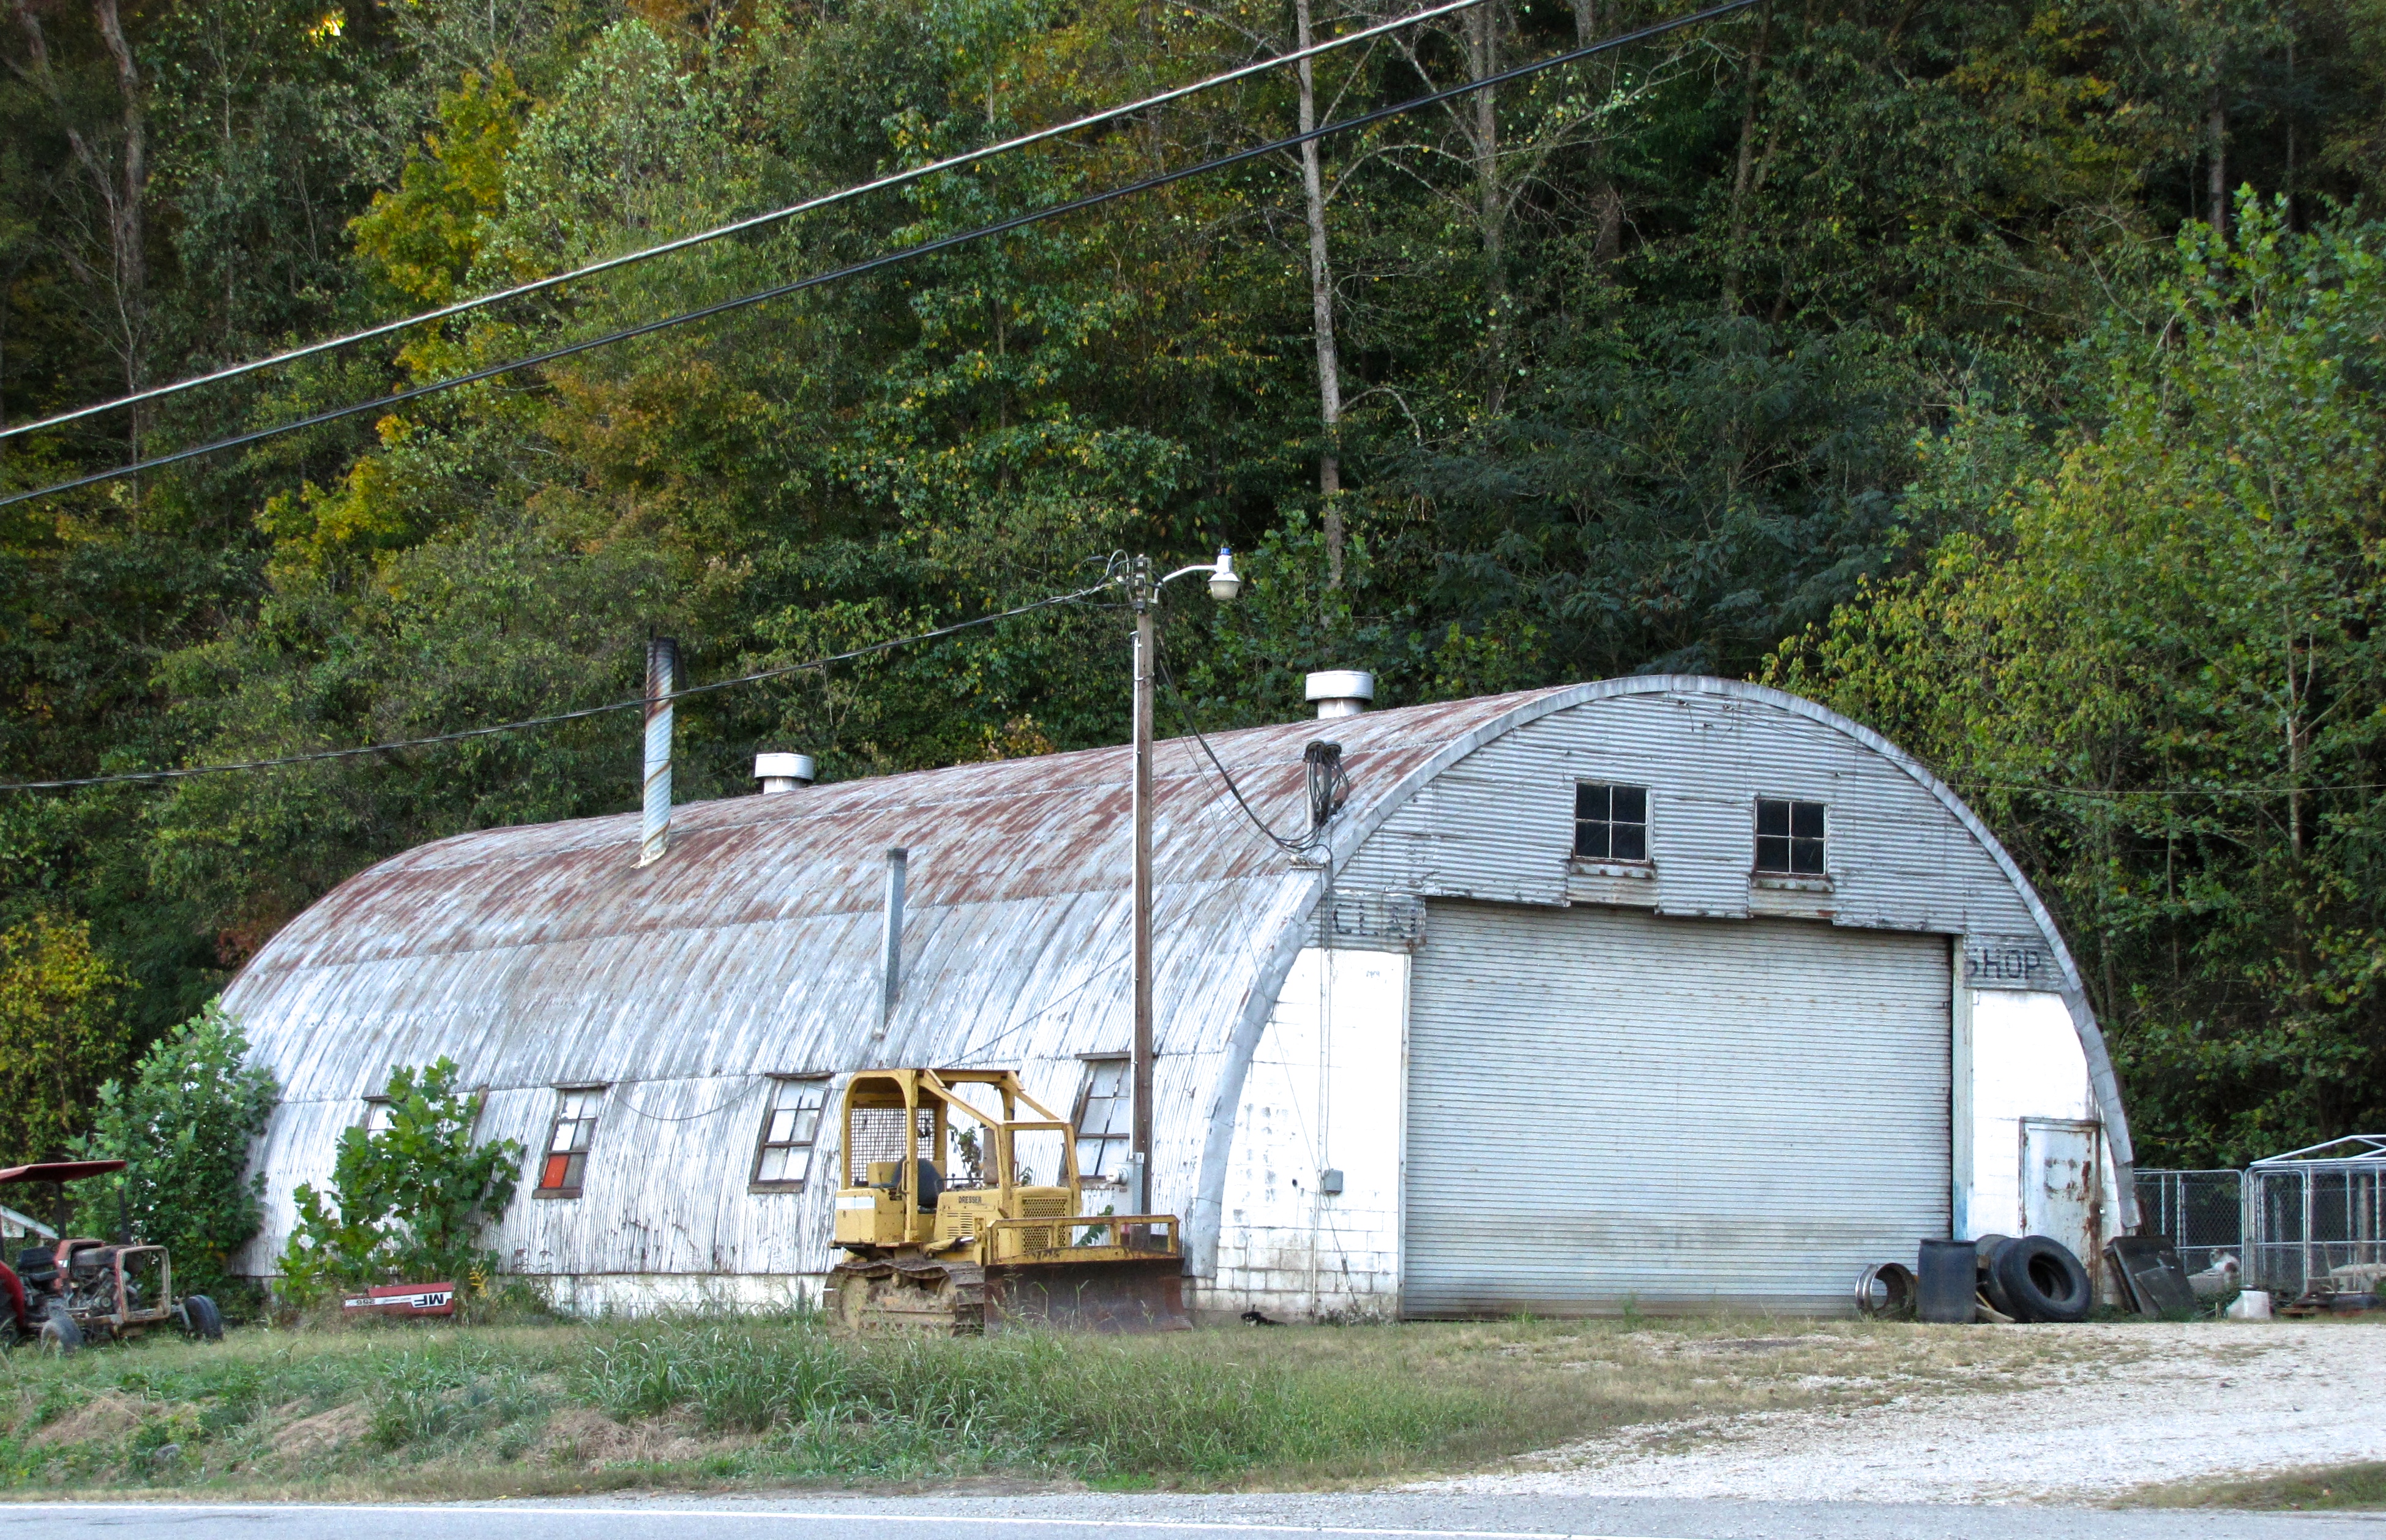 quonset hut in Baltimore, MD